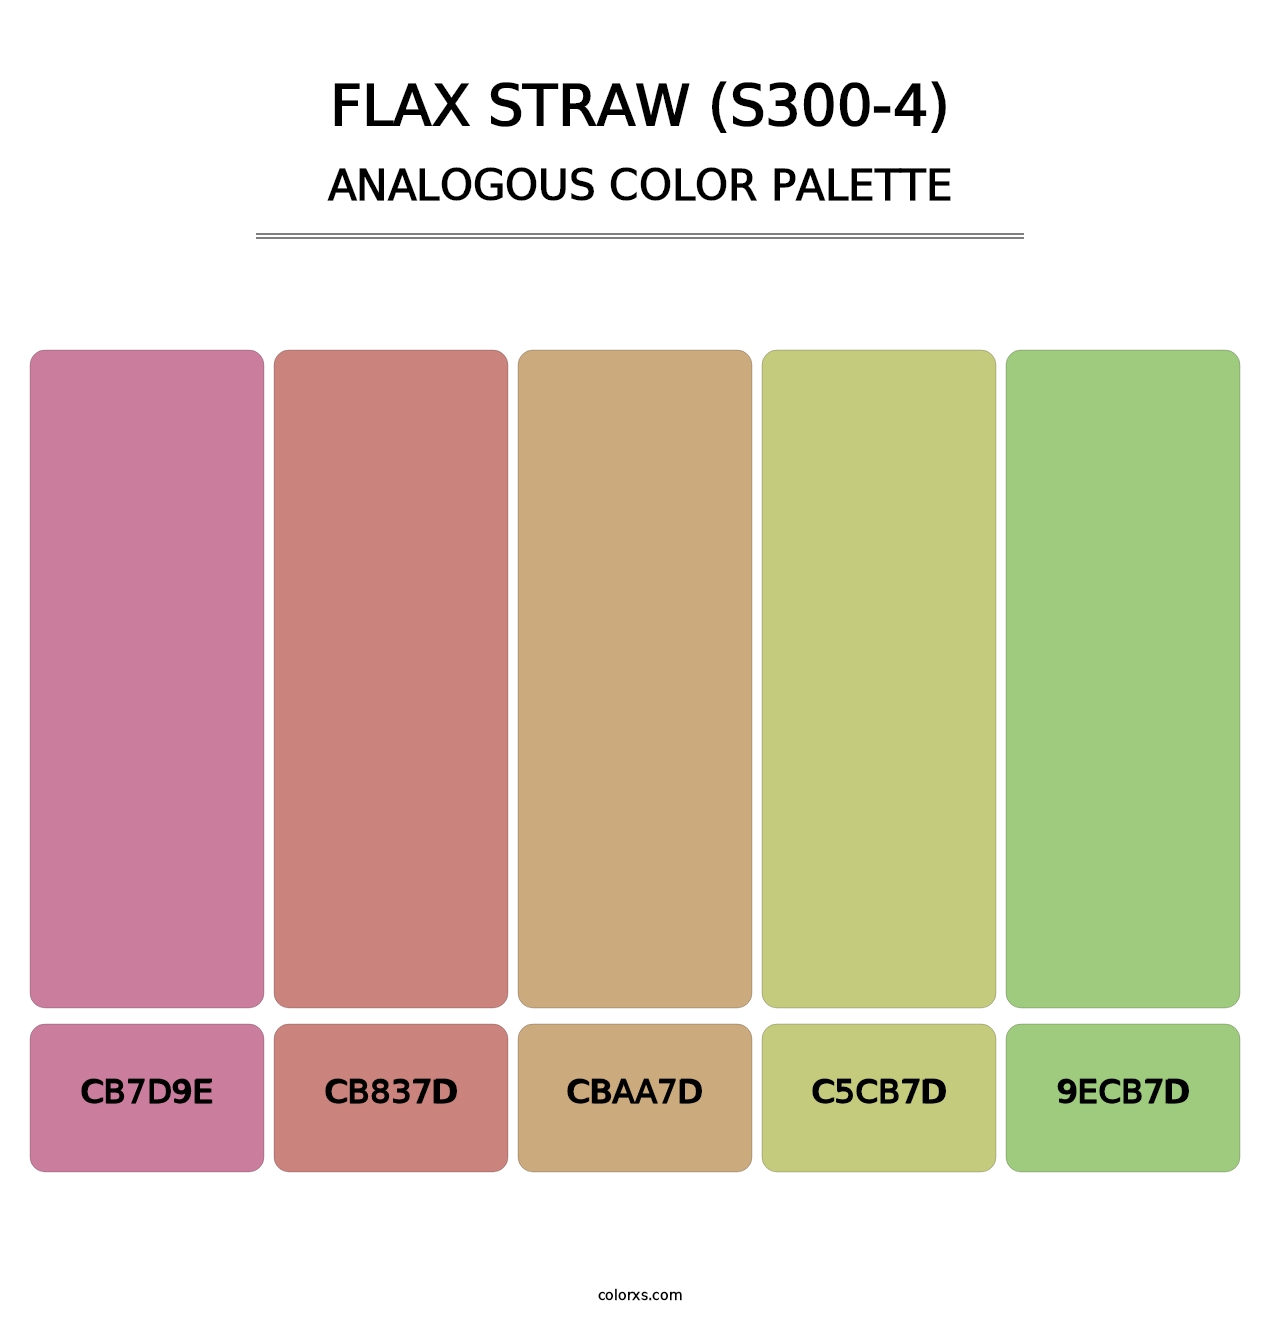 Flax Straw (S300-4) - Analogous Color Palette